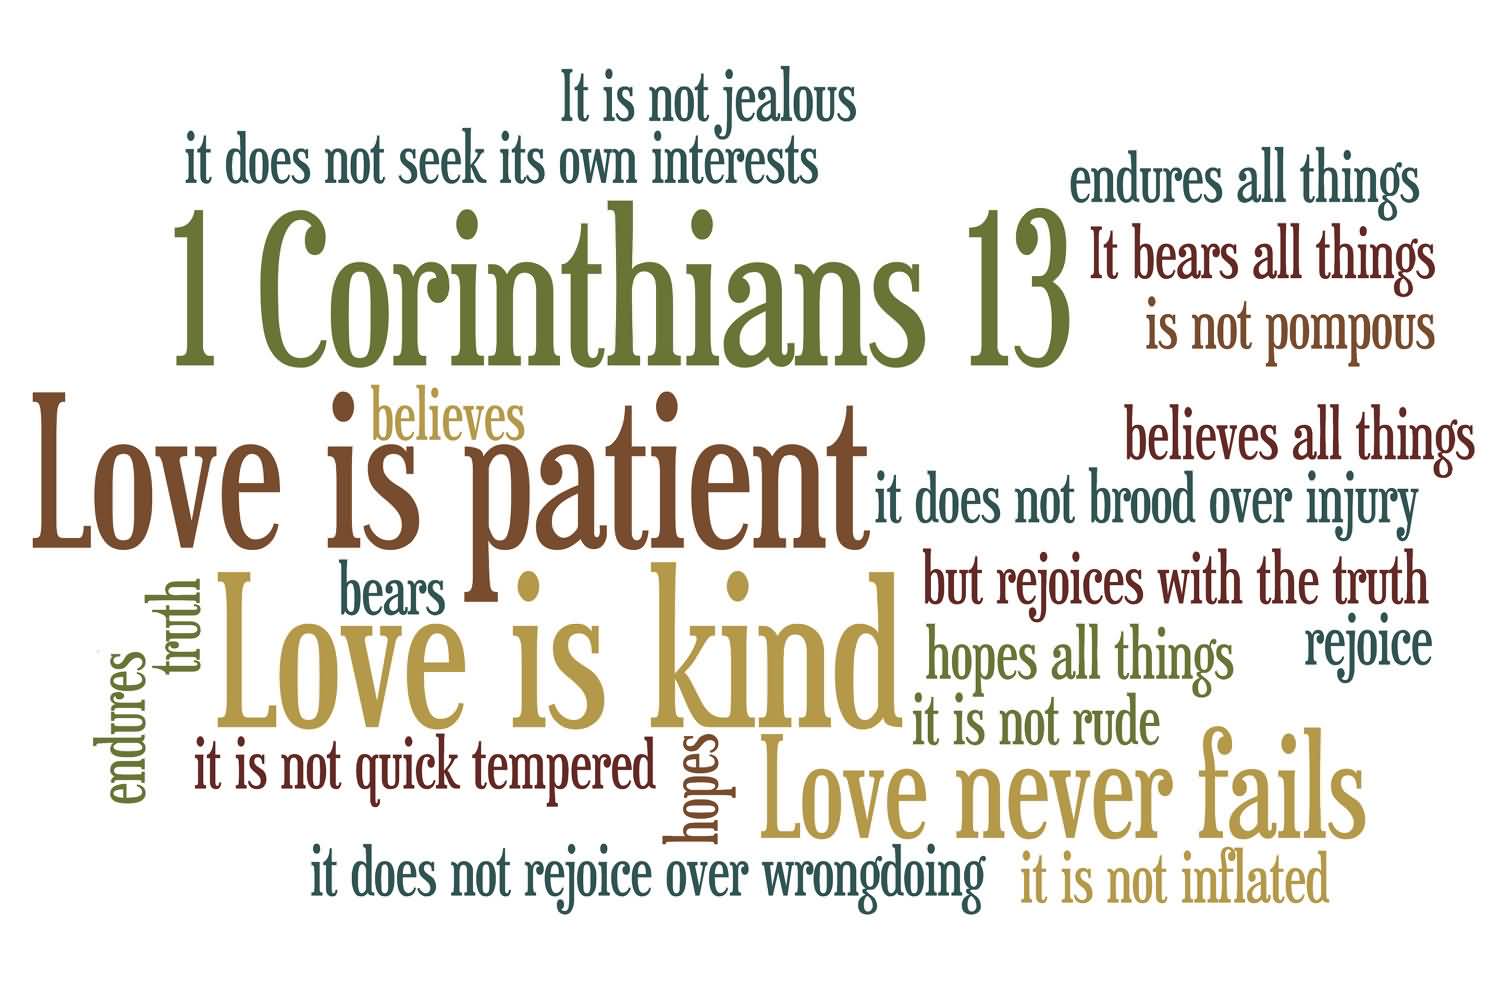 Quotes Of Love From The Bible 04